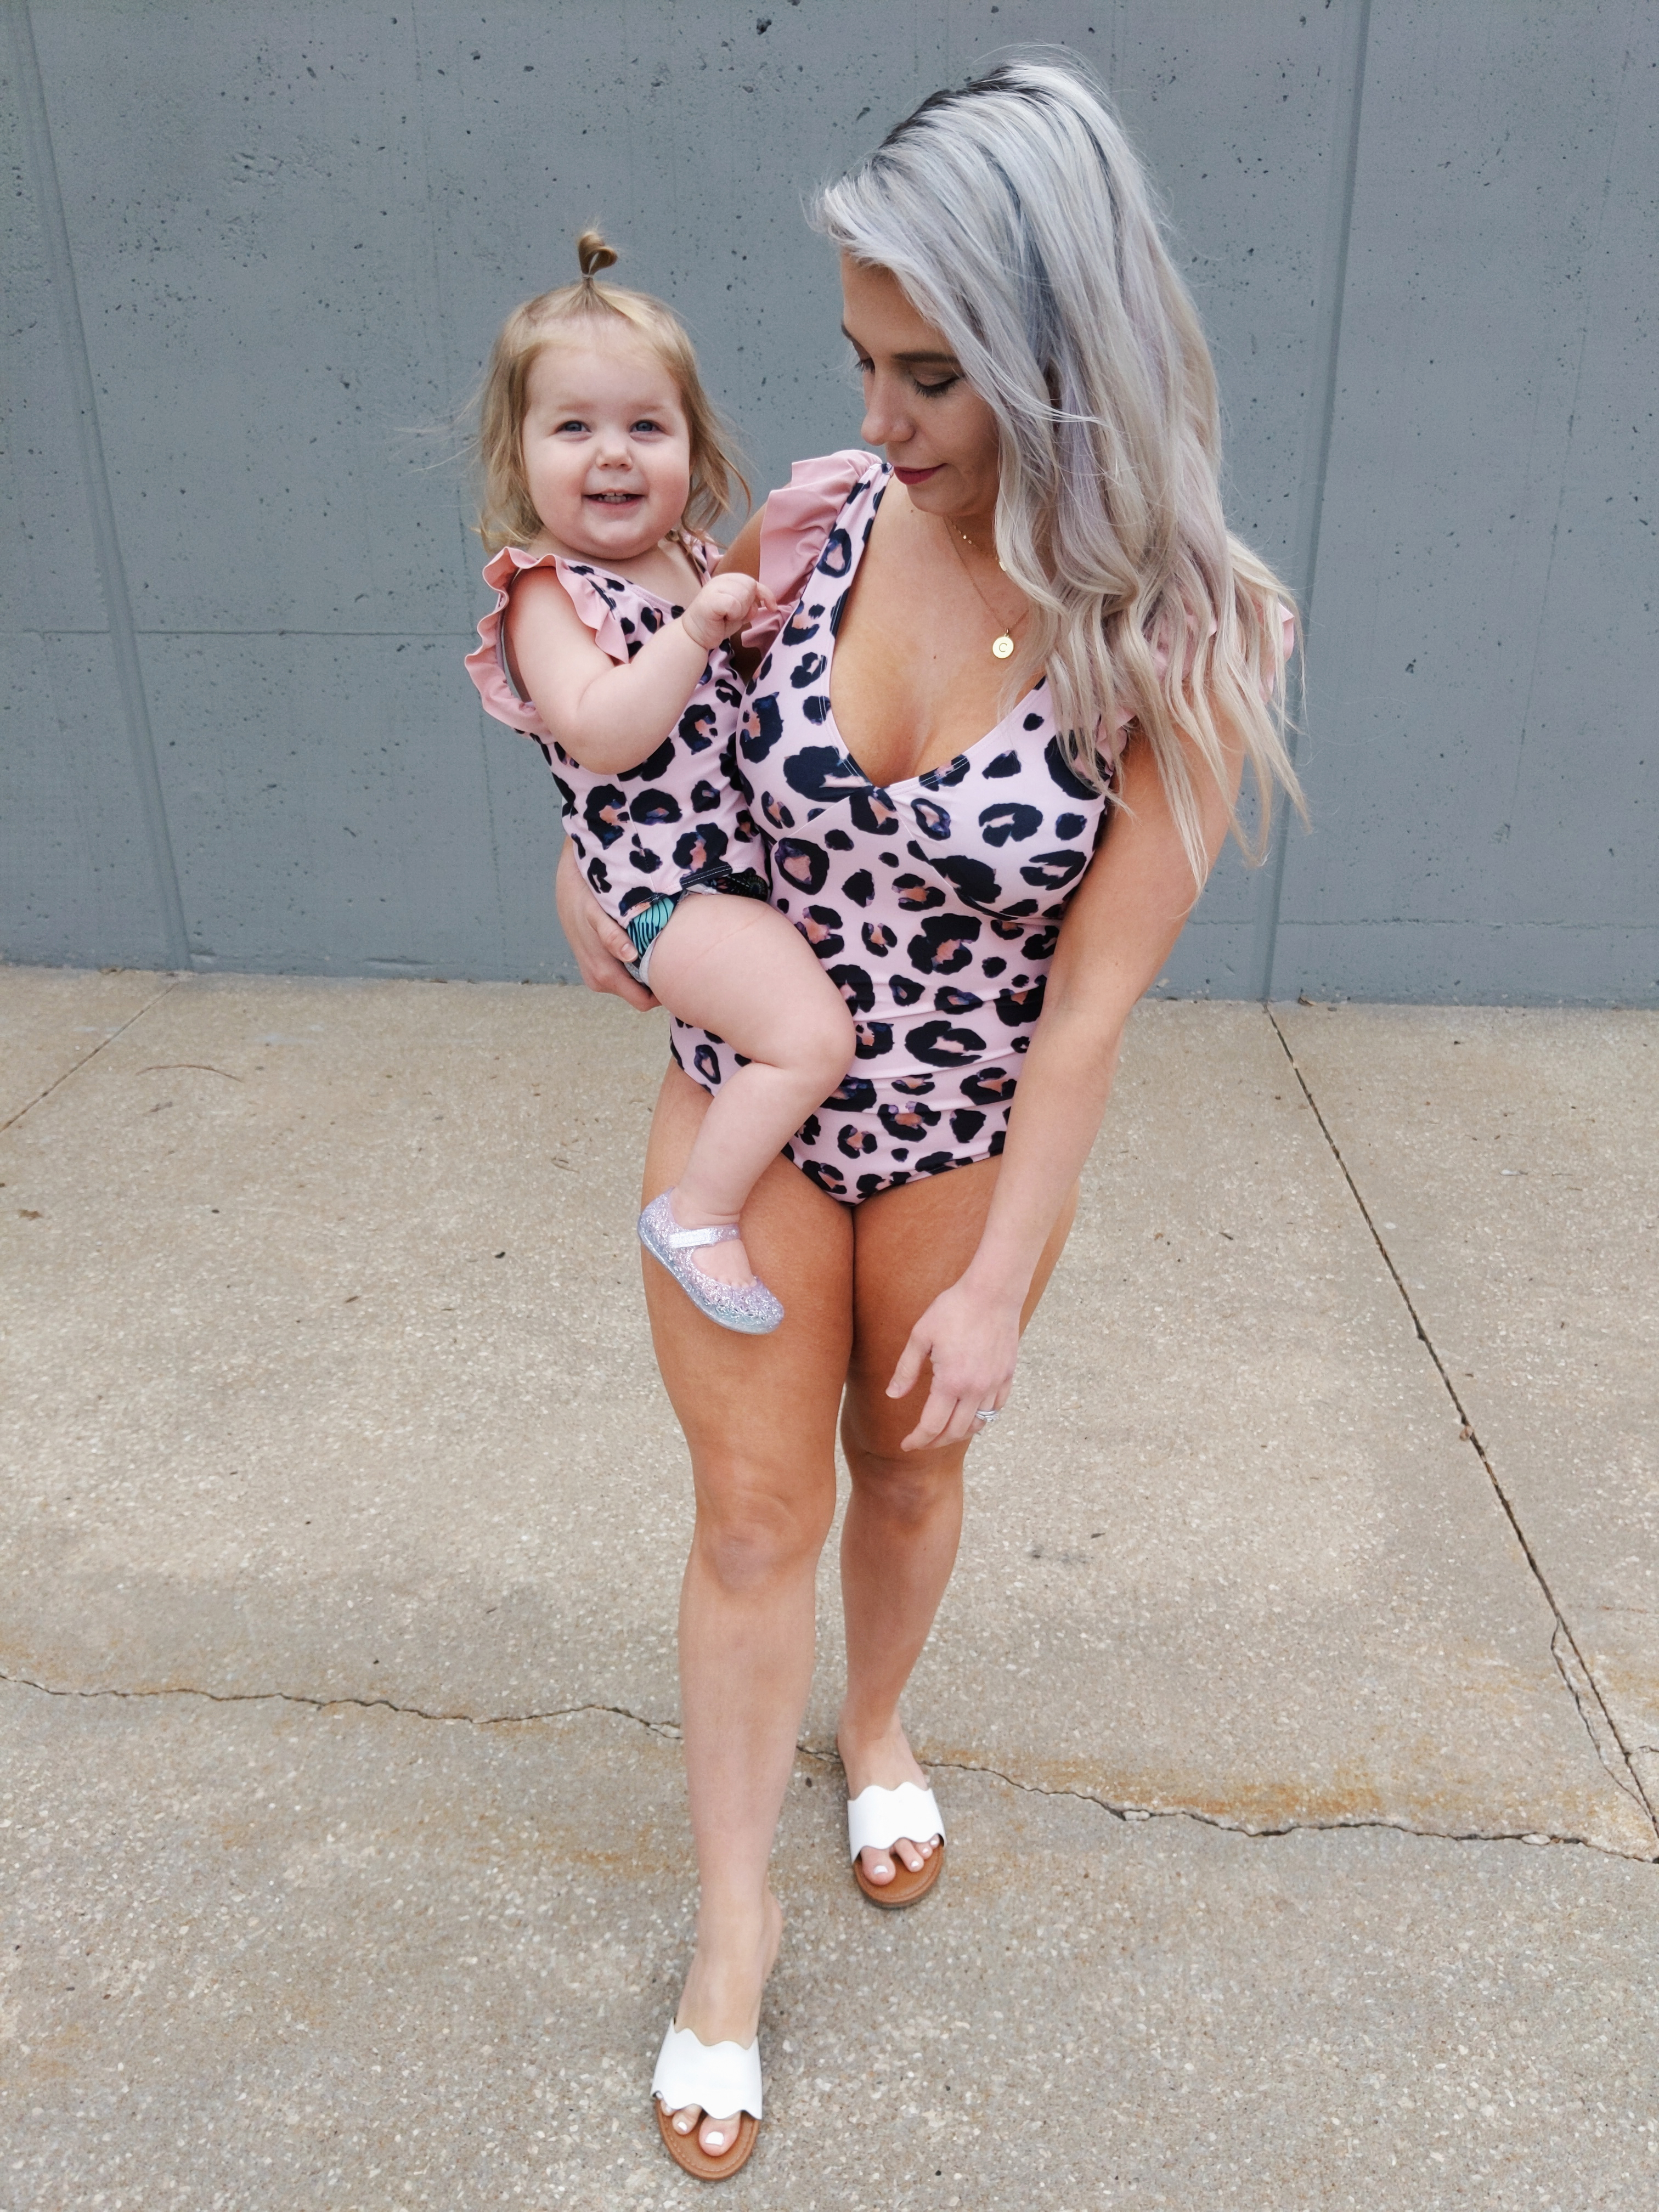 Mommy and Me Swimsuits Baby Girl: The cutest mommy and me swimsuits for baby girls! Featuring mommy and me one piece swimsuits and mommy and me bikini swimsuits so you'll find the best mommy and me swimwear for you and your mini me! Fashion blogger Tricia Nibarger of COVET by tricia showcases mommy and me swimsuits with her daughter. #mommyandme #girlmom #swimsuits